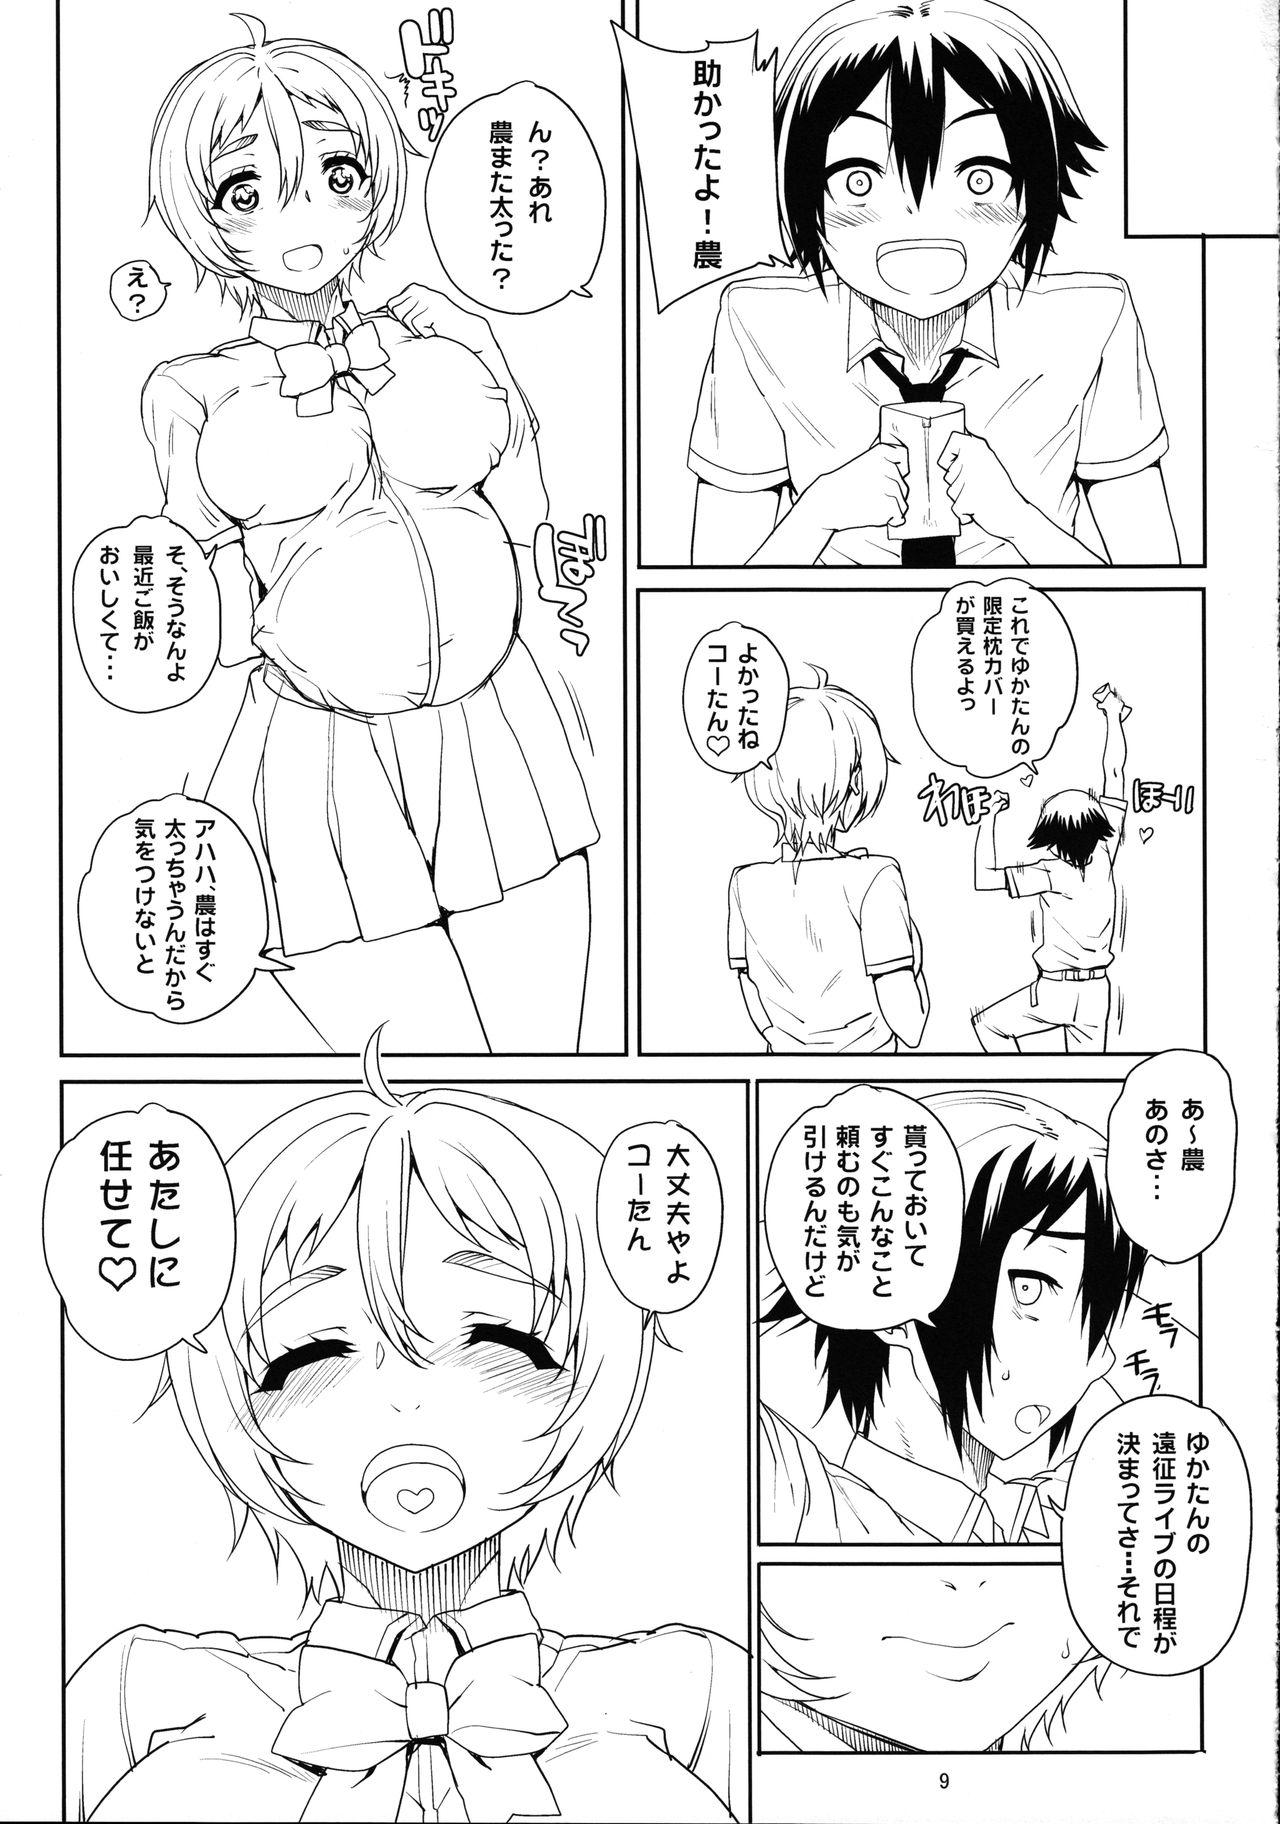 Best Blow Job Ever Kayumidome 11 Houme - No-rin Groupsex - Page 10